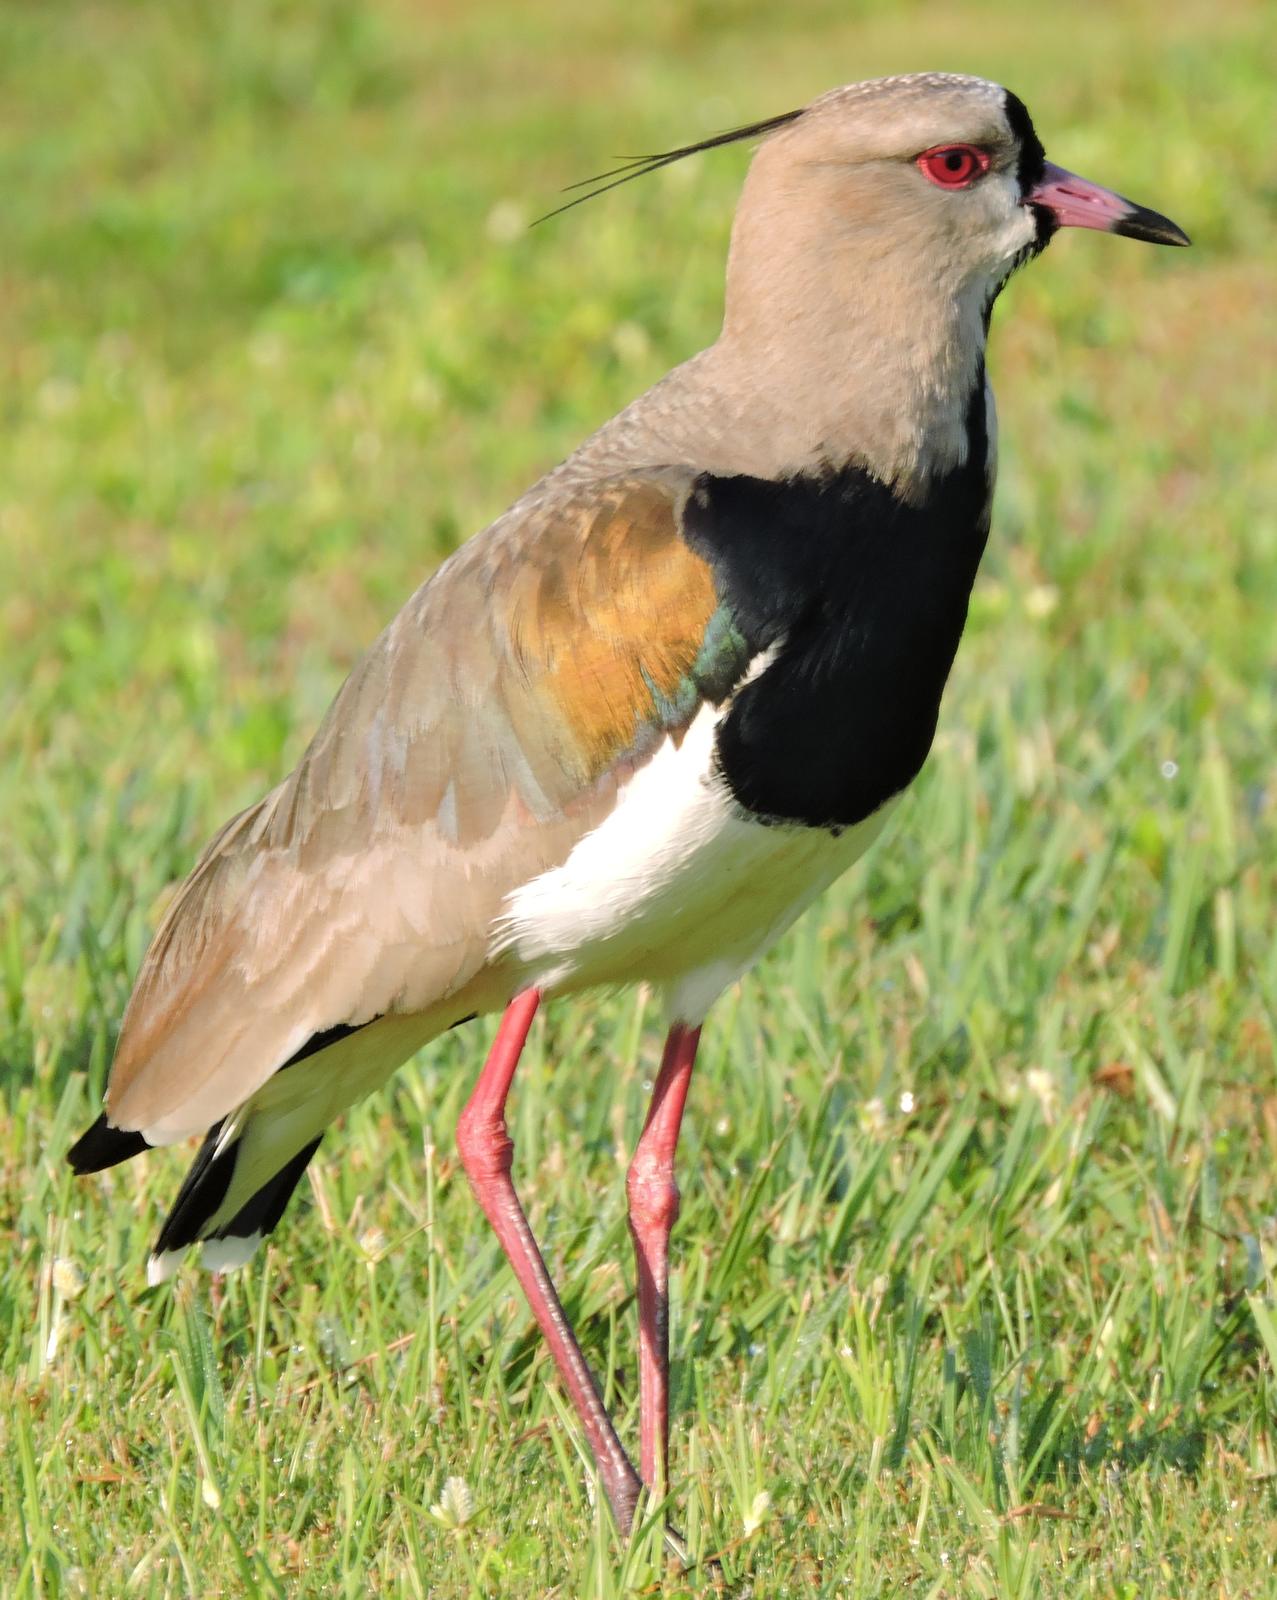 Southern Lapwing Photo by Peter Lowe